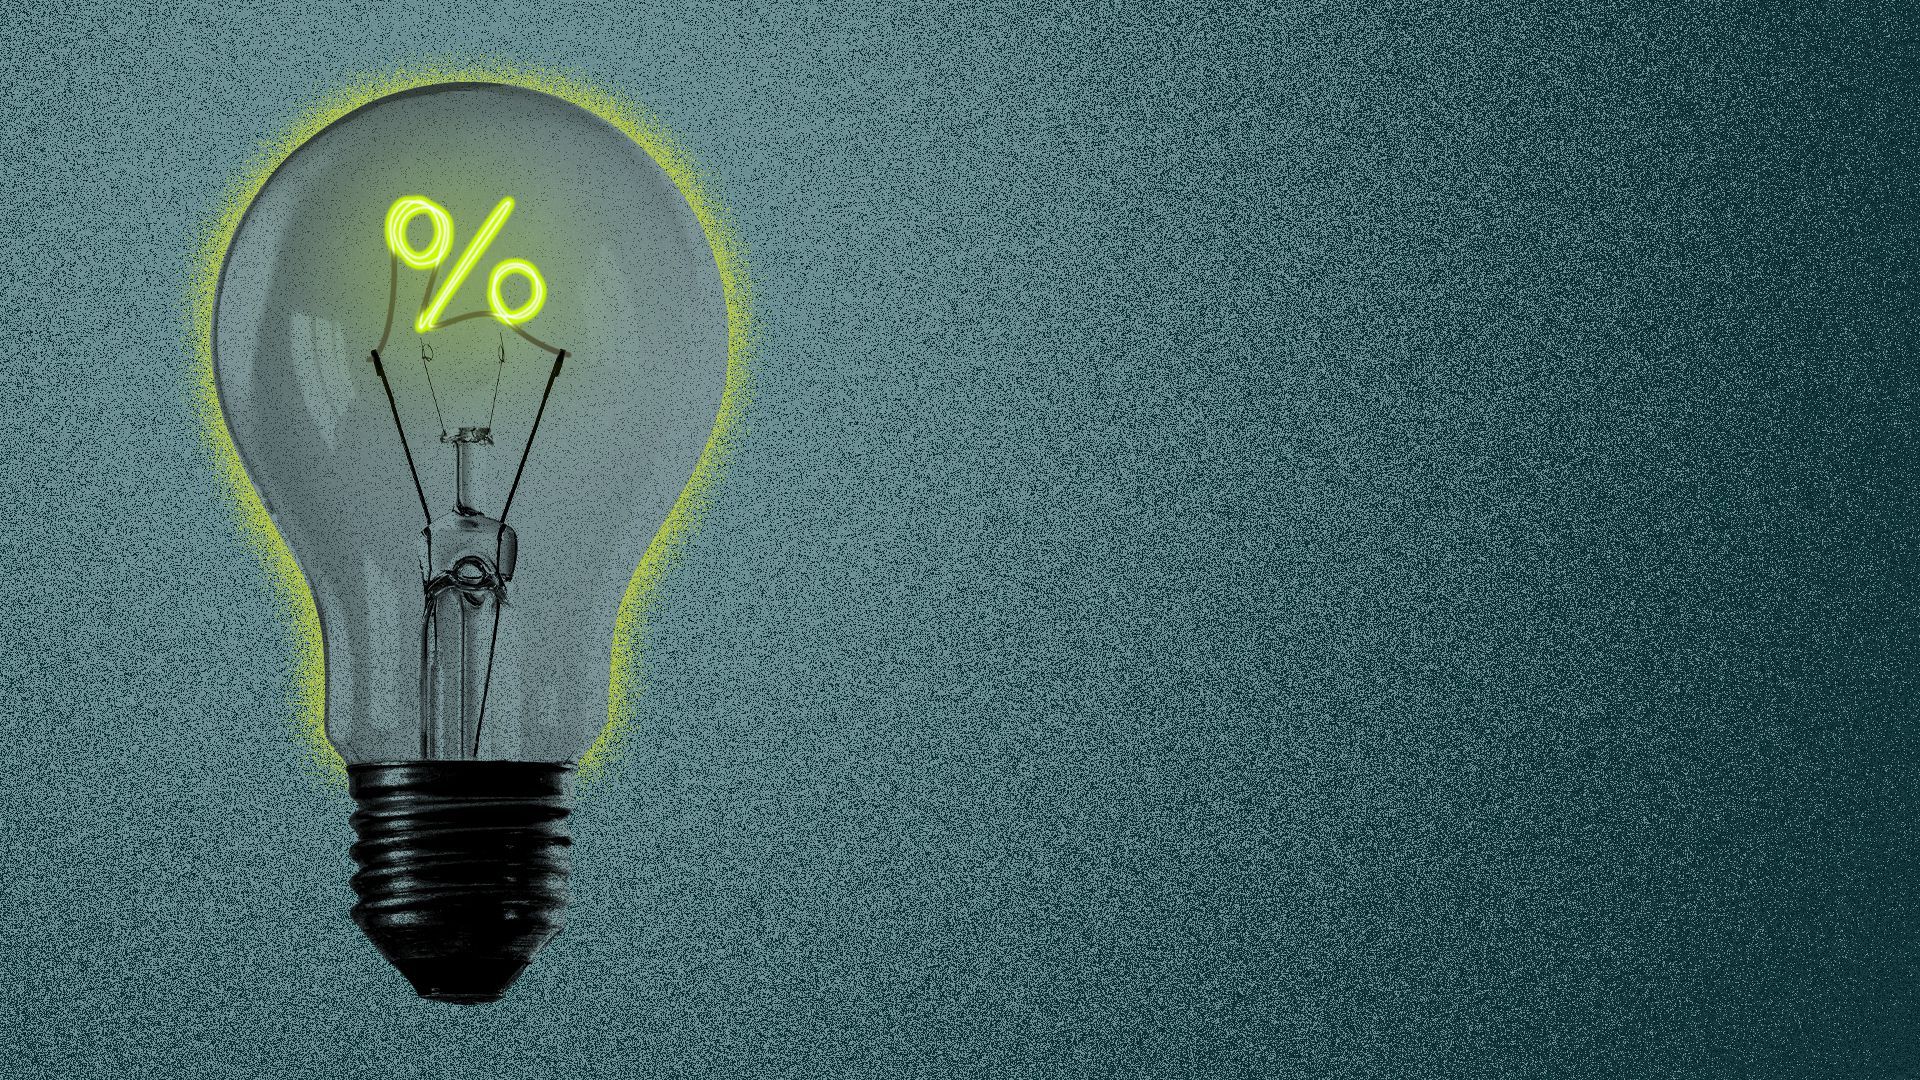 Illustration of a light bulb with a percent sign-shaped filament. 